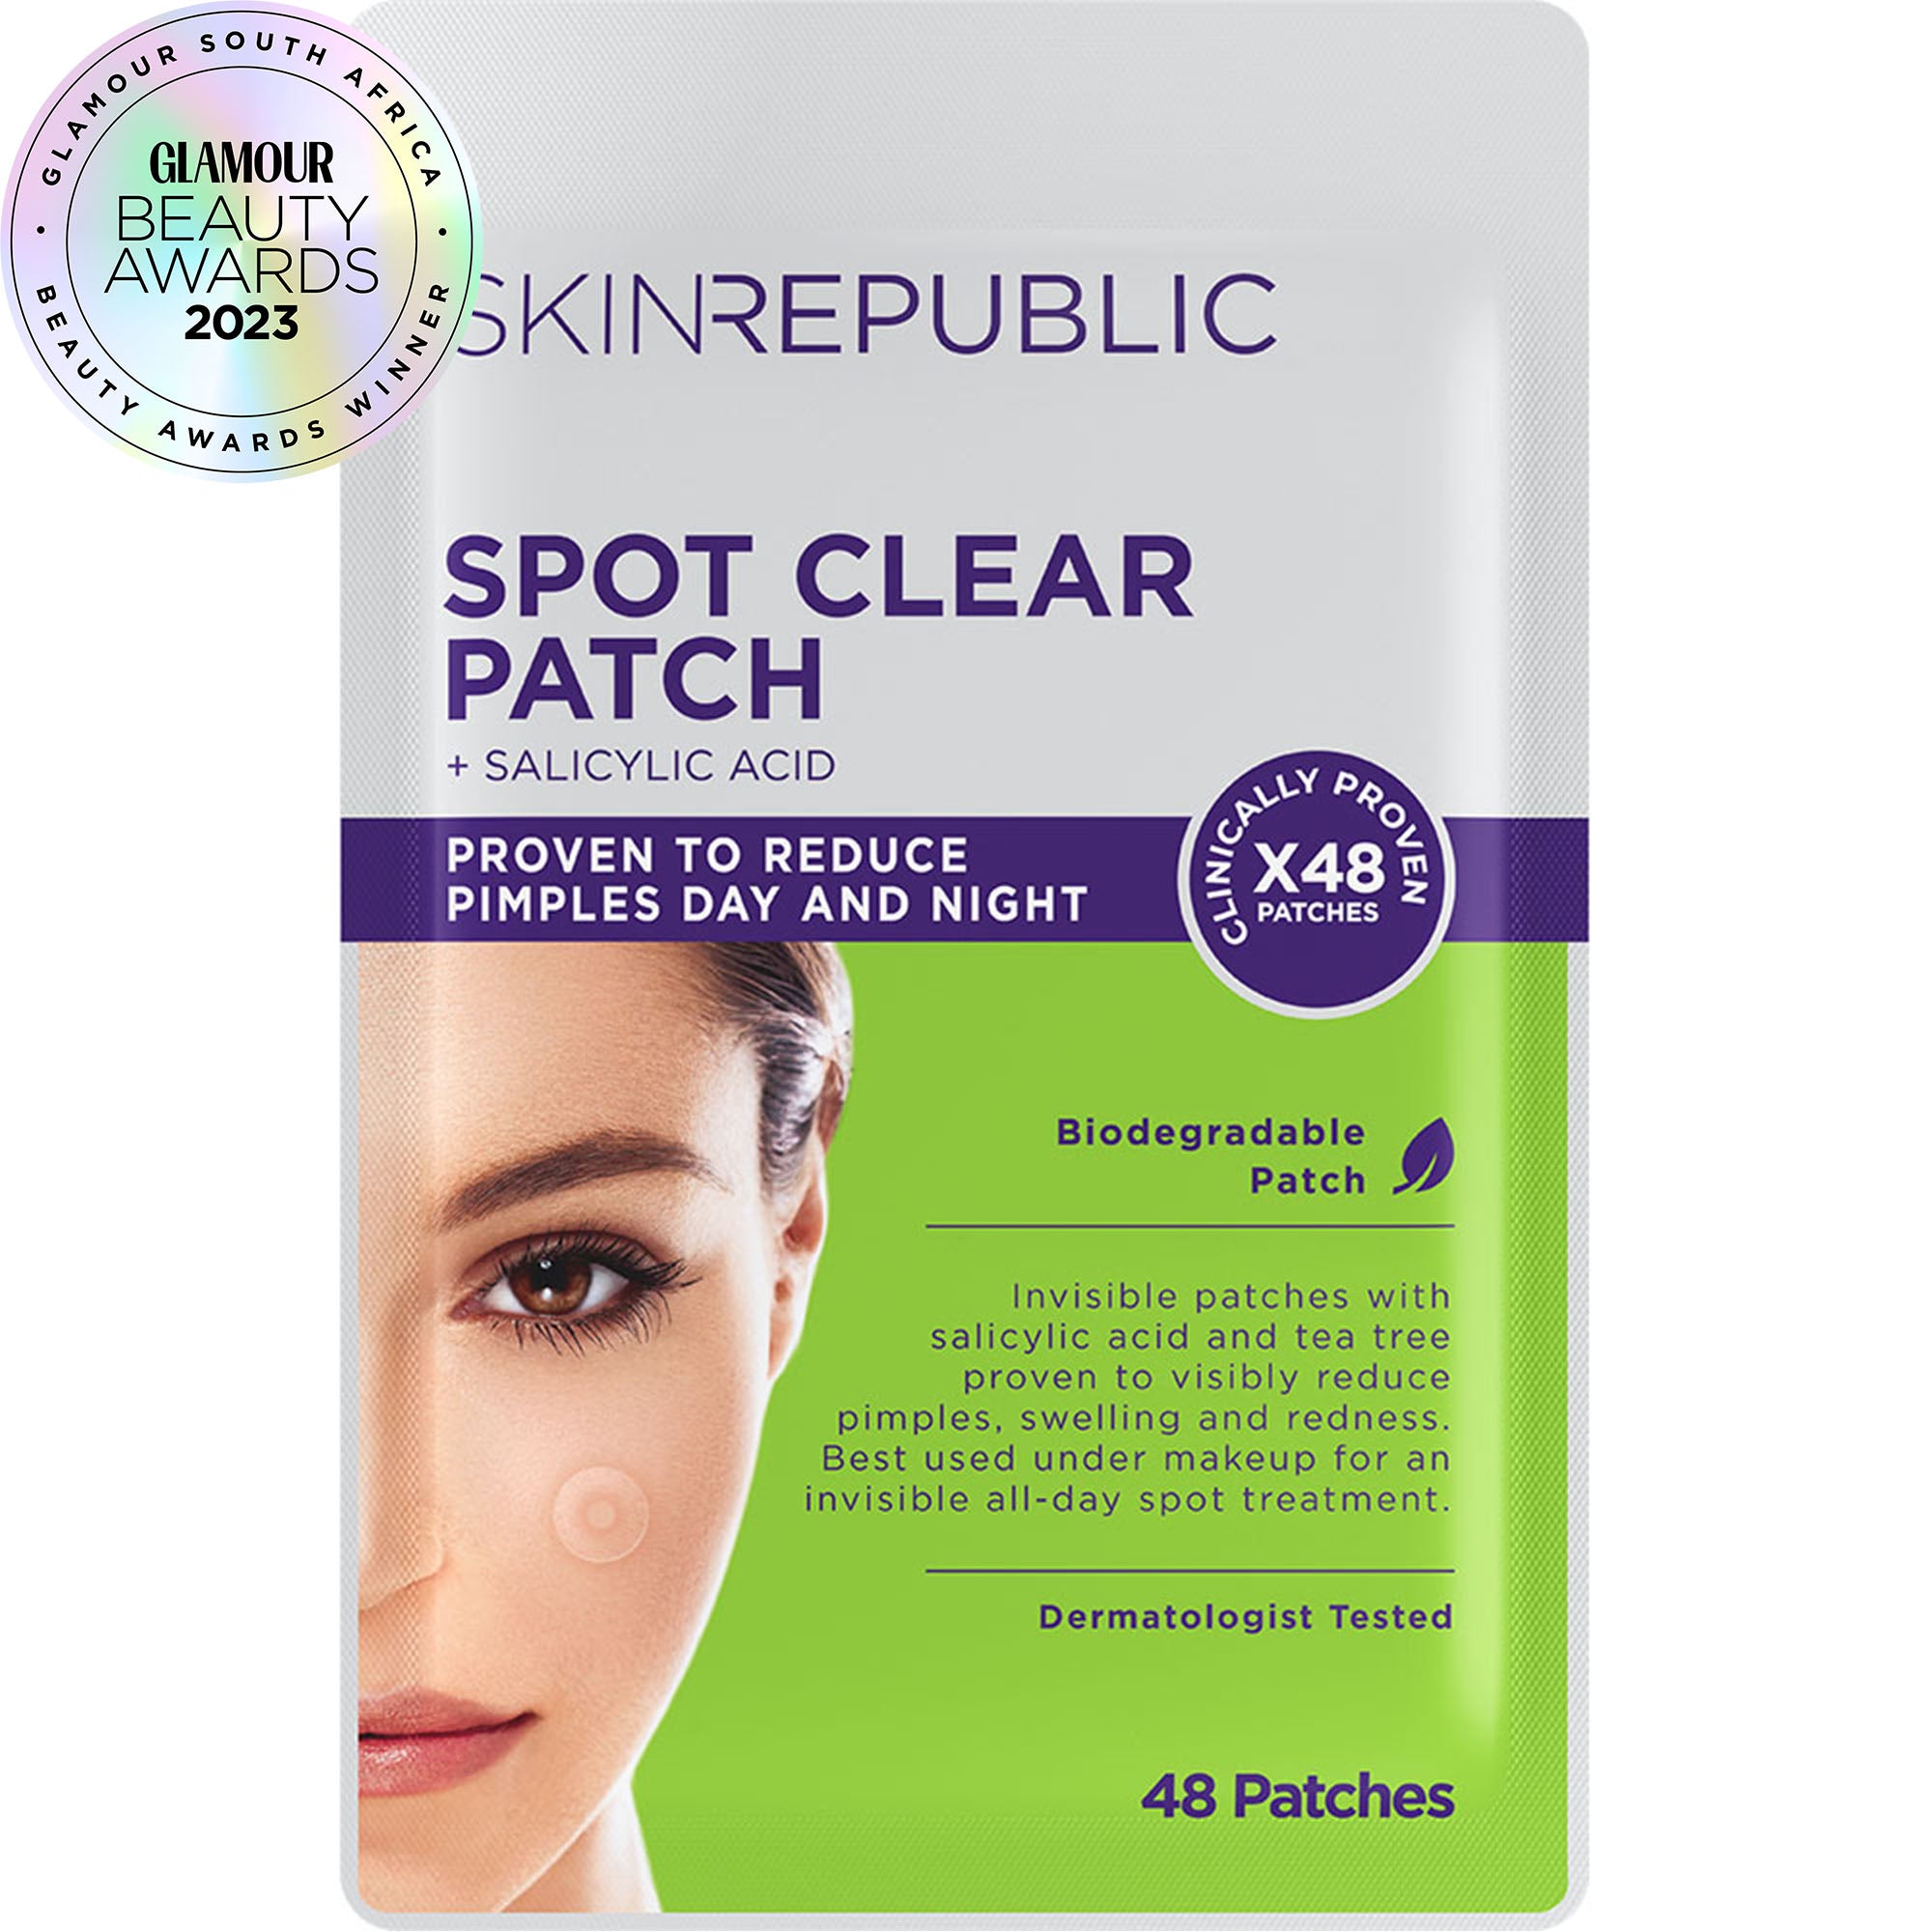 Spot Clear Salicylic Acid Patch (48 Patches)